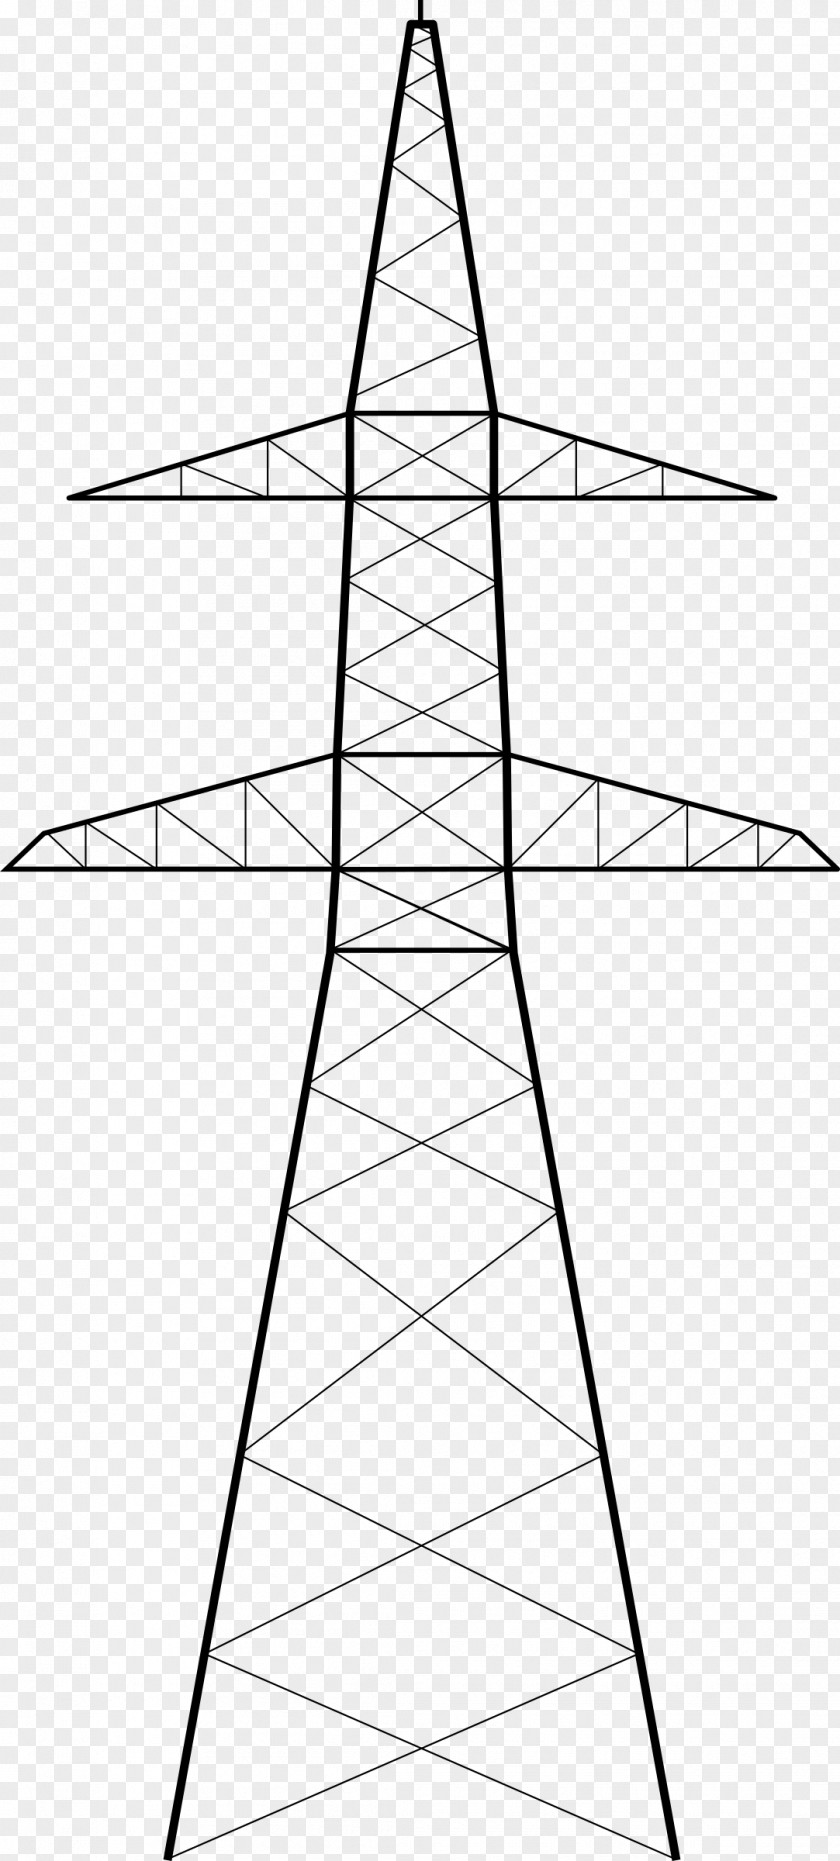 Electric Tower Transmission Power Drawing Clip Art PNG